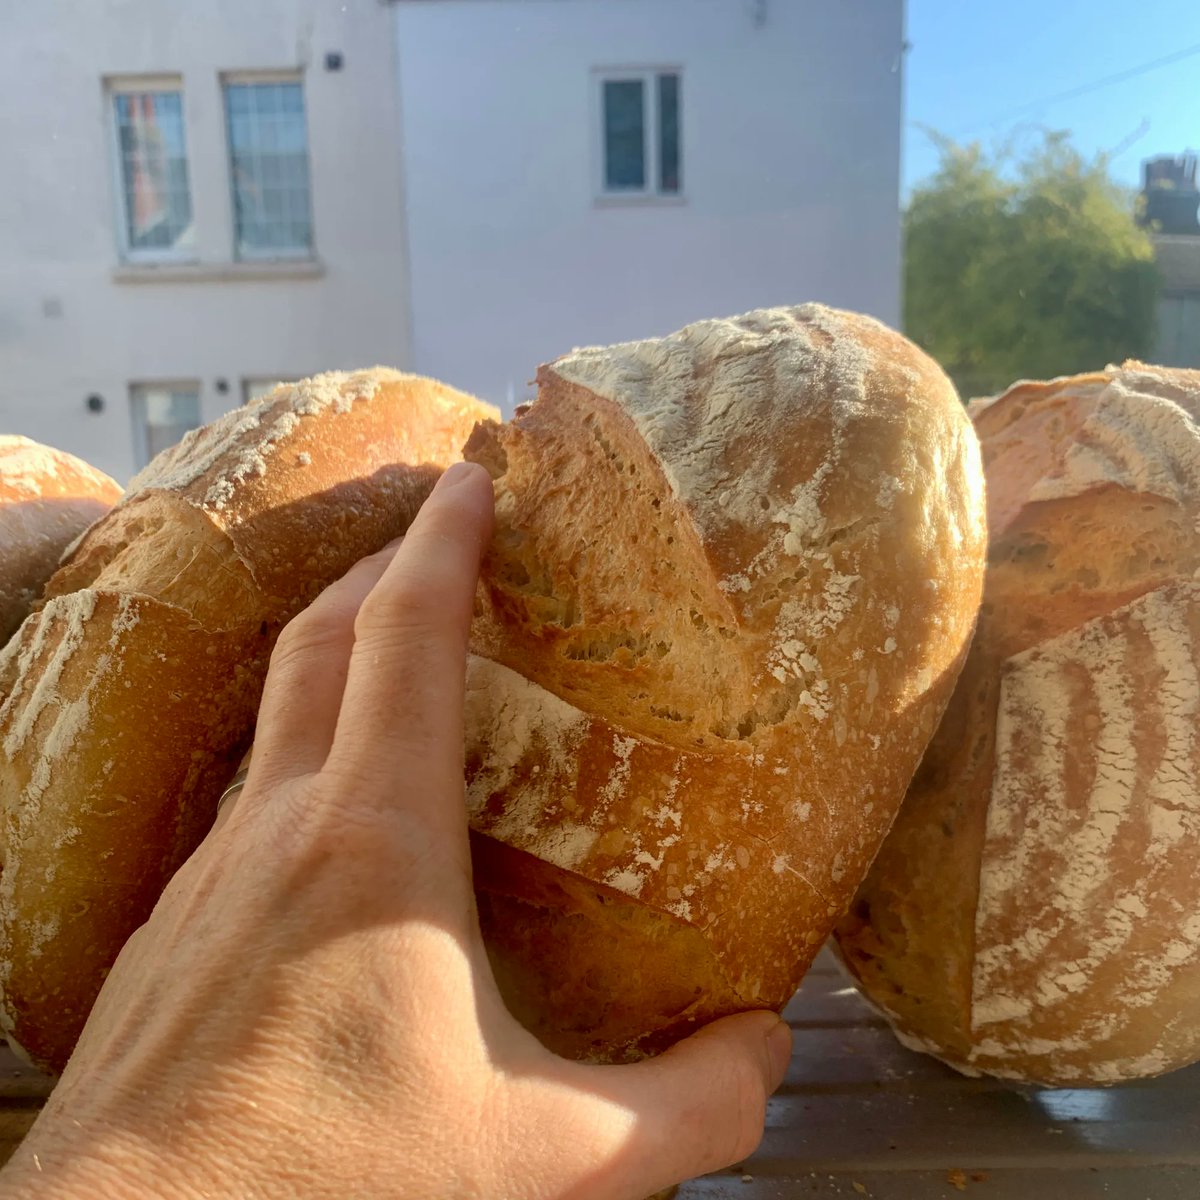 Who wants one of these for their lunch? 
Got a lot of bread on the shelf for you. 
Why not swing by and grab some..?
#shoplocal #shopsocial #realbread